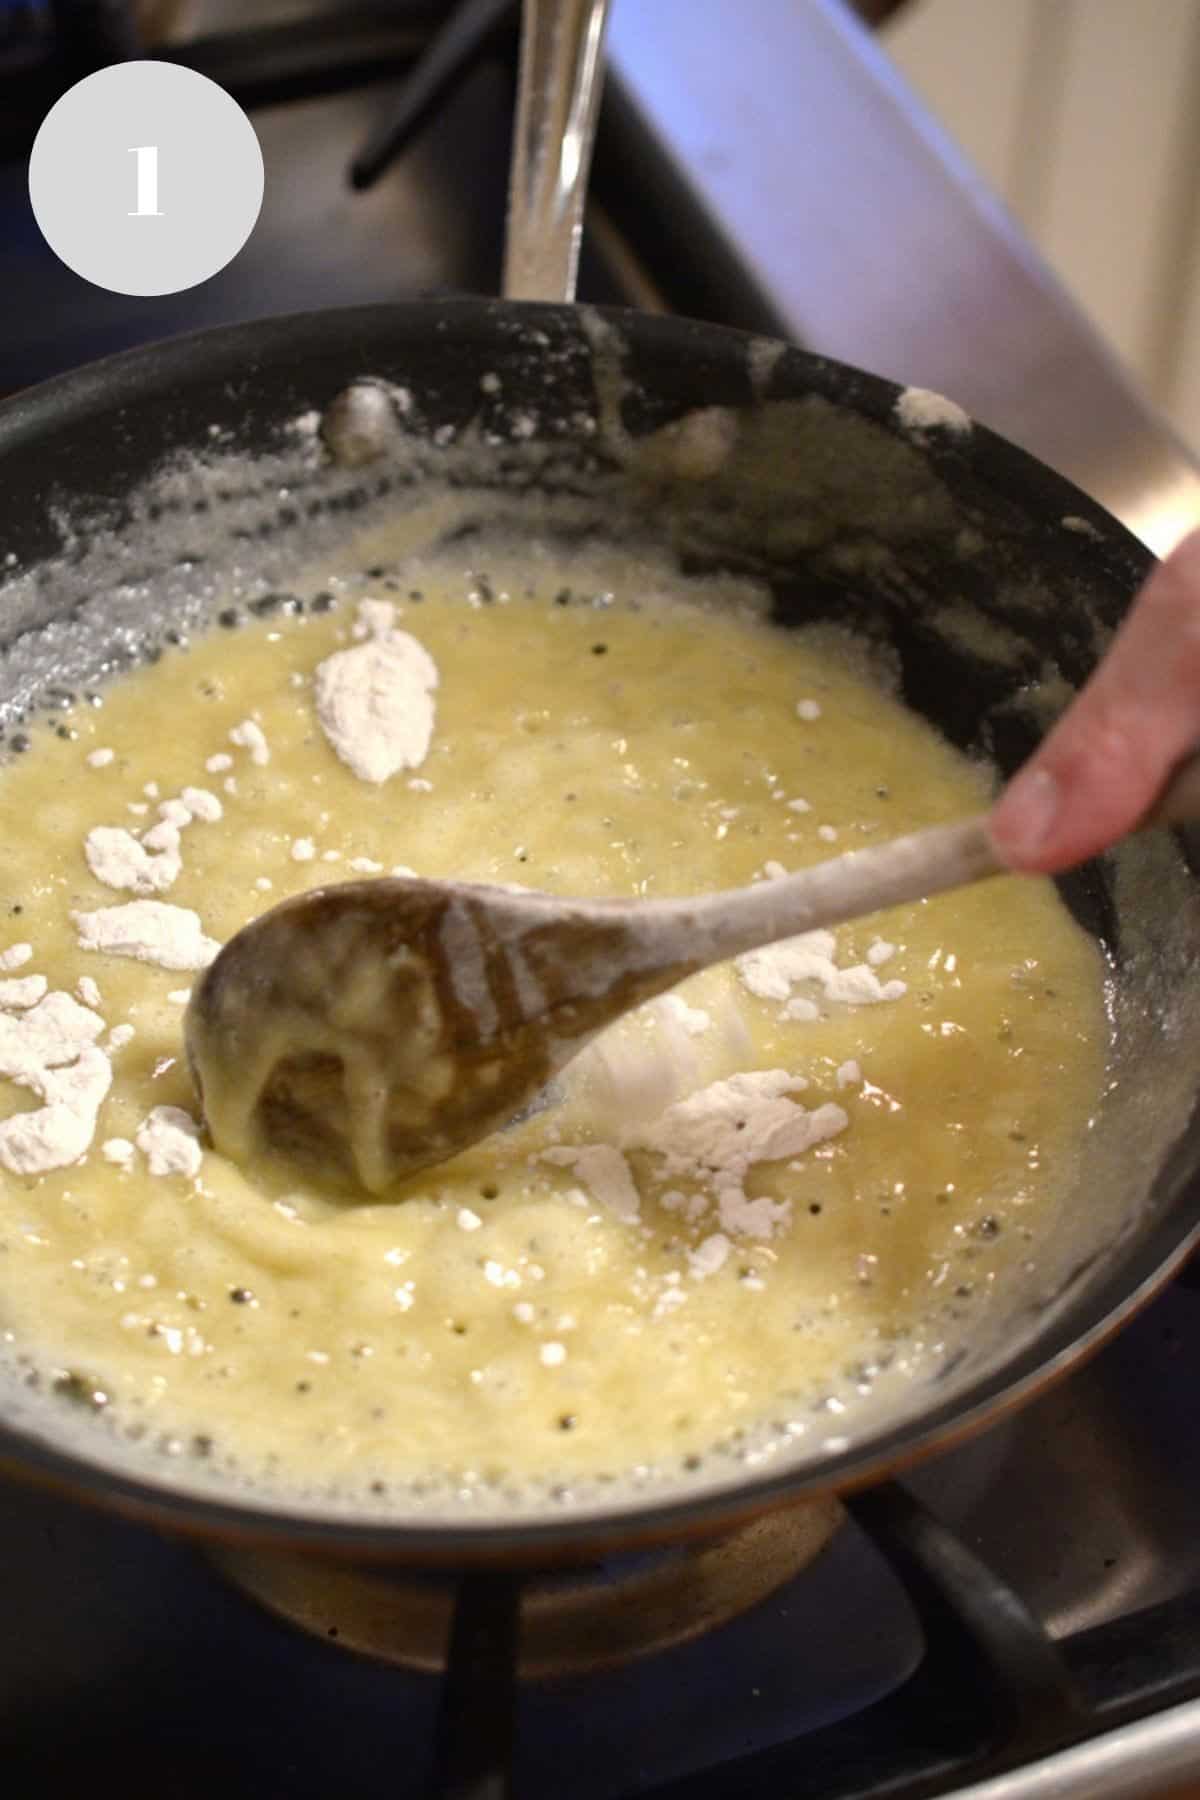 Stirring flour and fat in a pan with a wooden spoon.